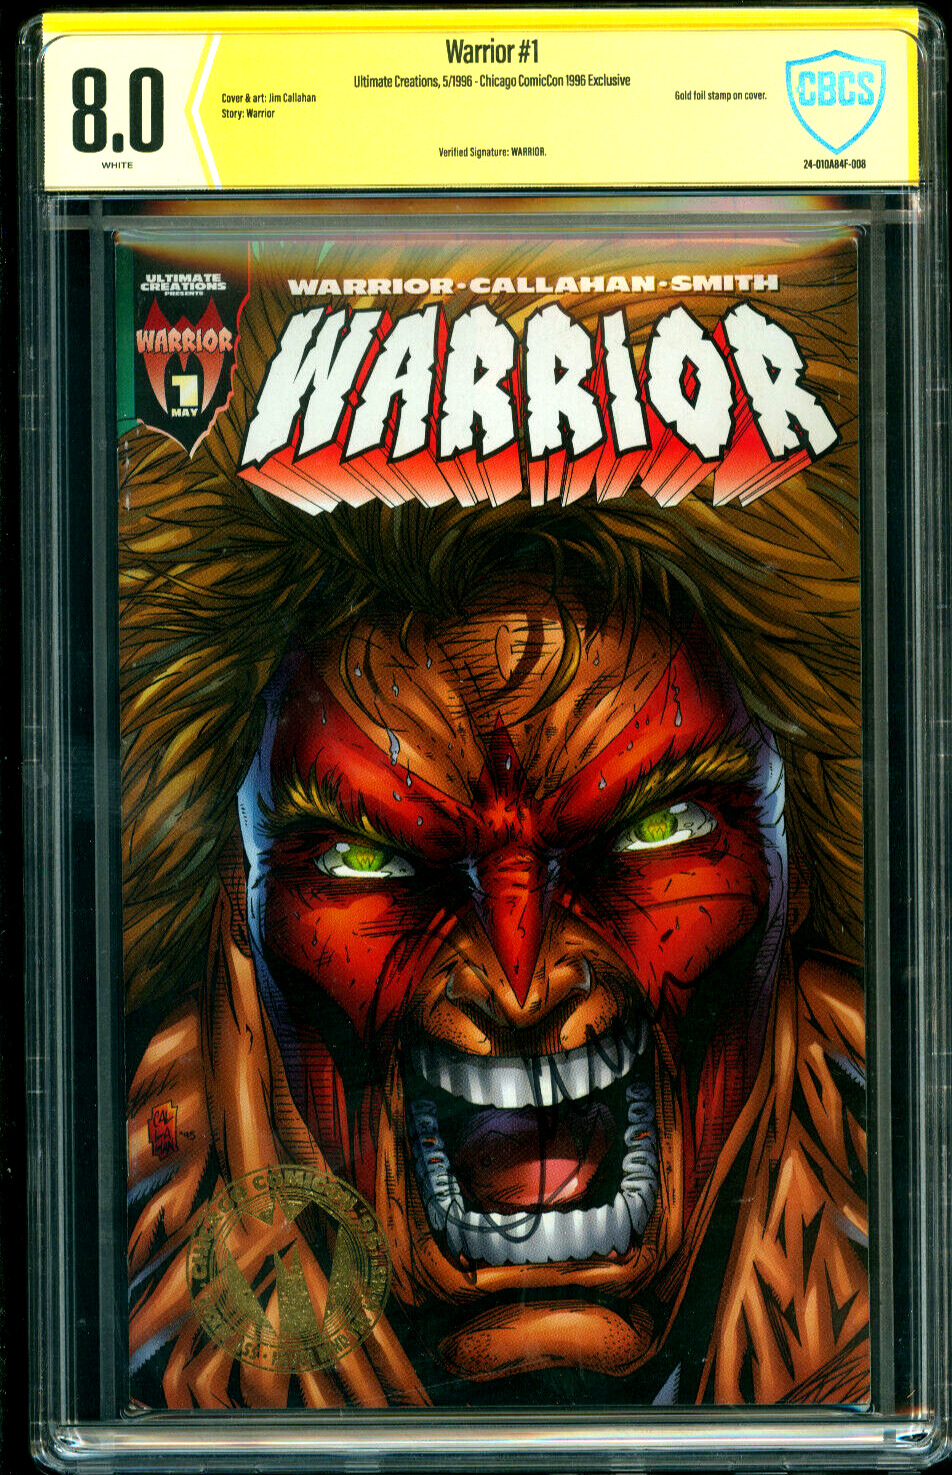 Warrior #1 CBCS 8.0 SS Signed by Ultimate Warrior Gold Variant WWF WWE CGC Comic